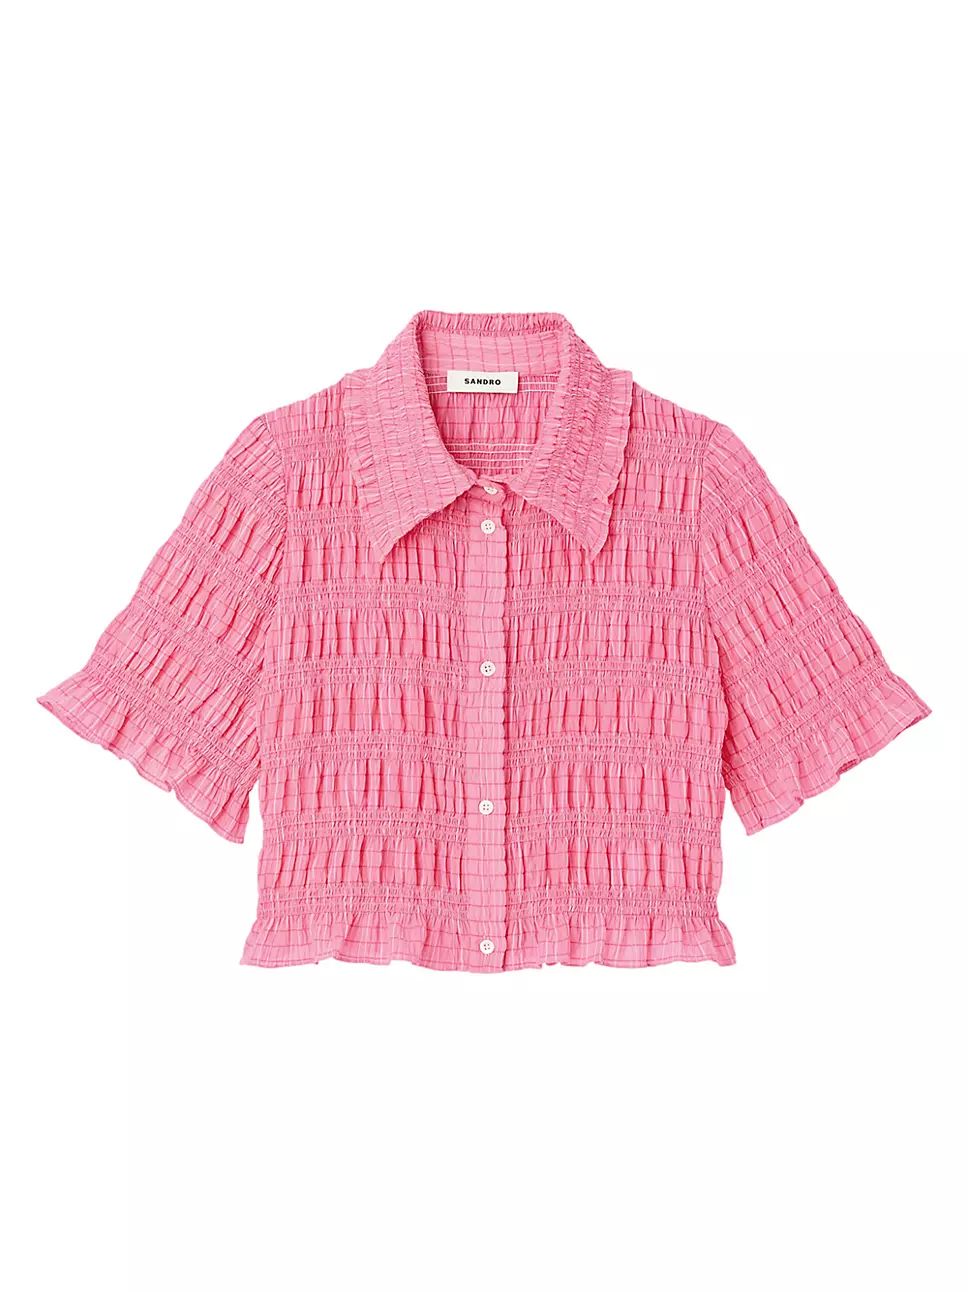 Cropped Smocked Shirt | Saks Fifth Avenue